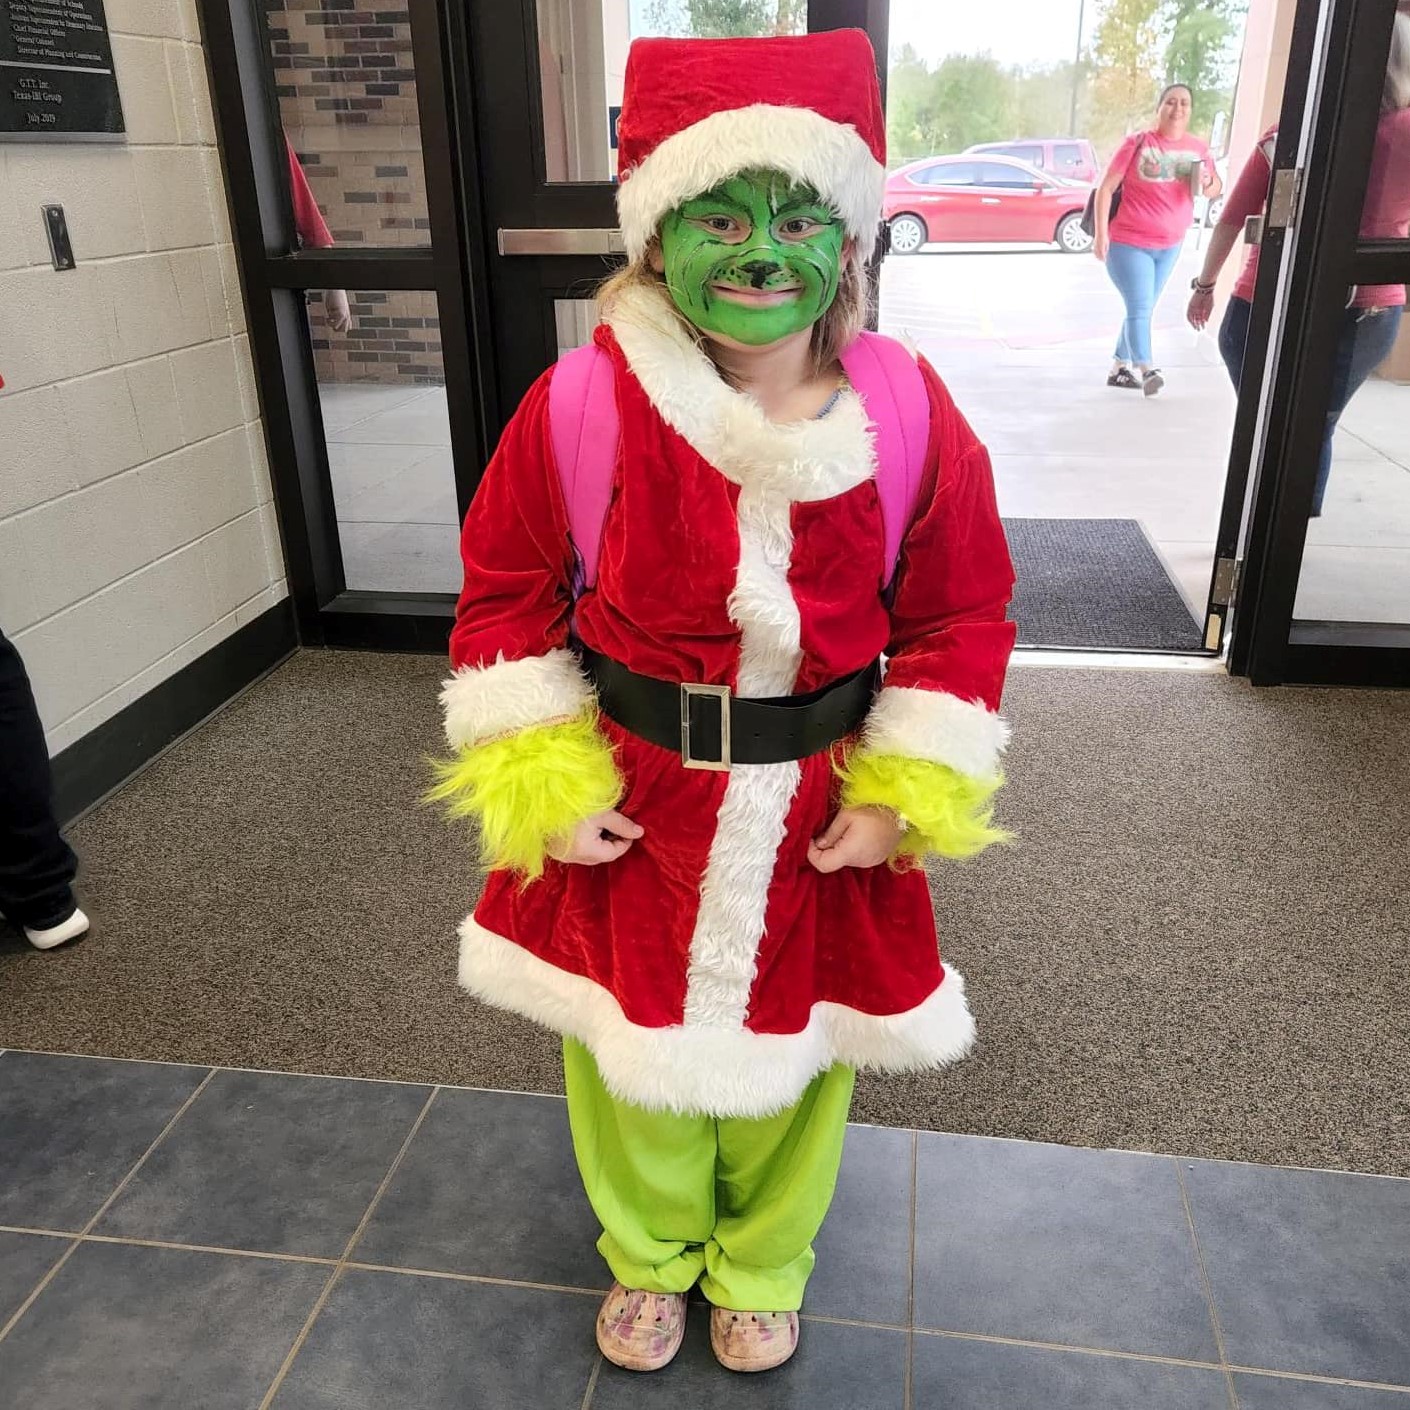 A student at Austin dresses up to show her holiday spirit!